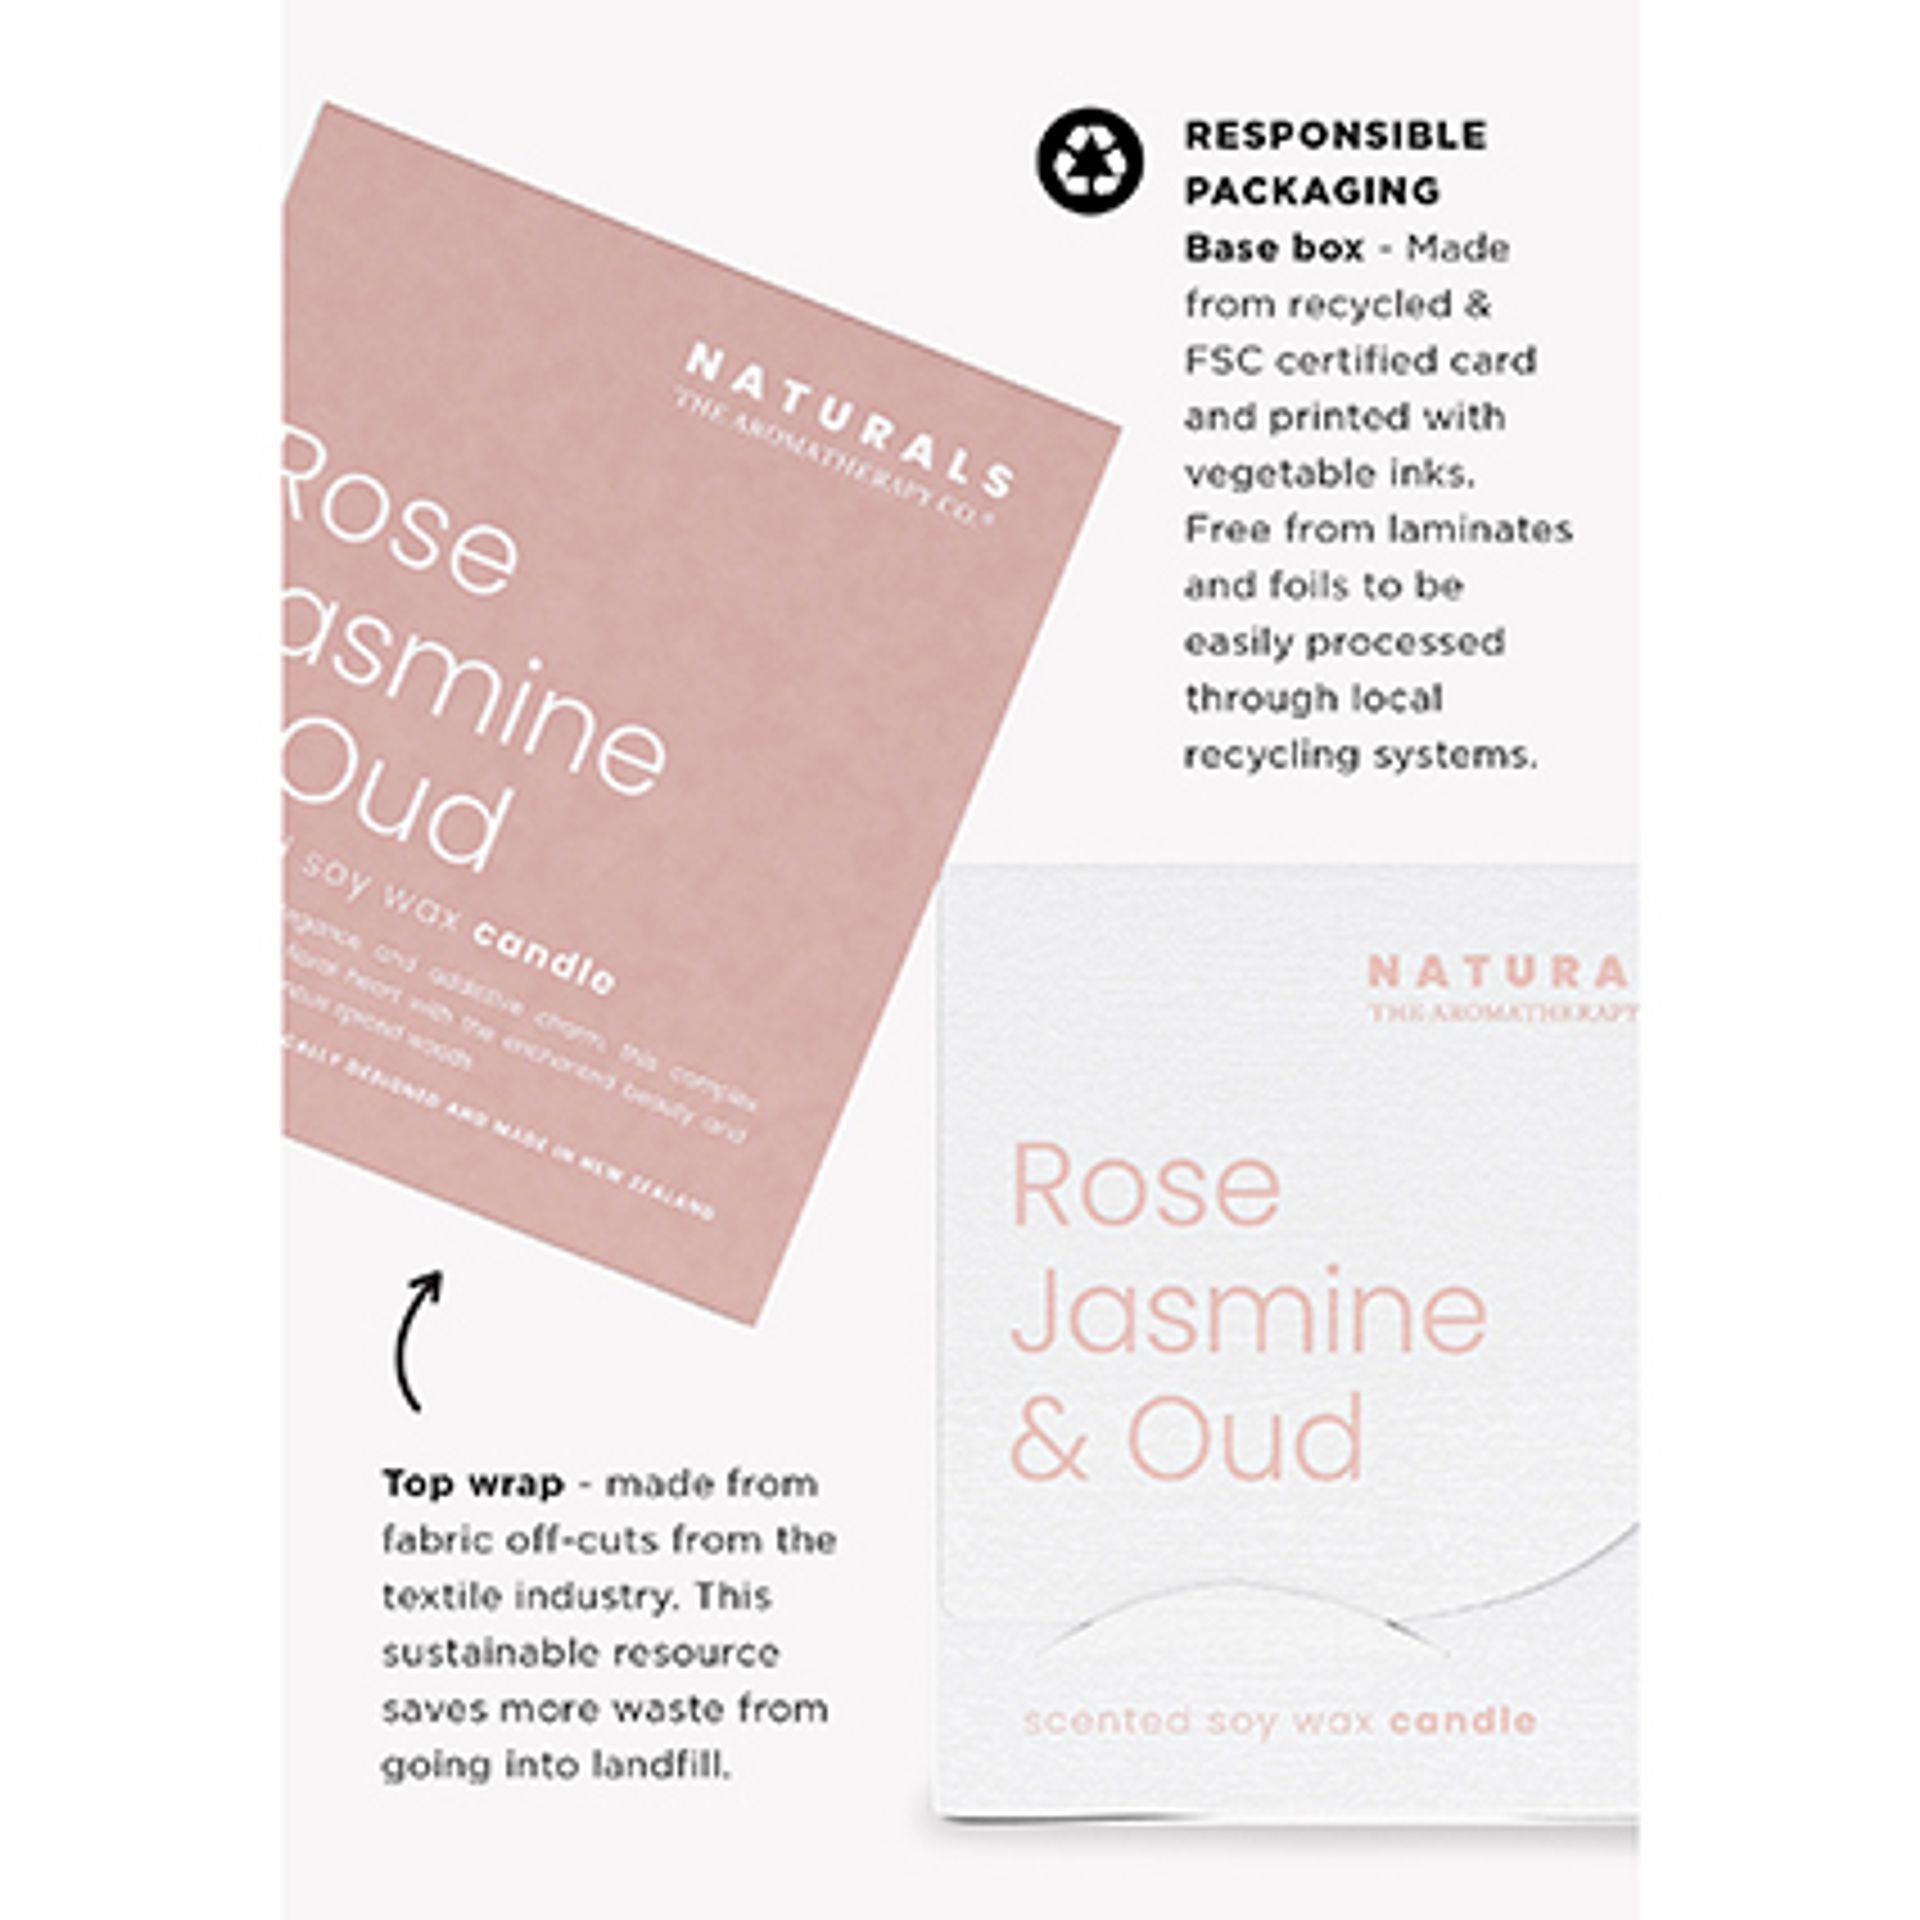 The Aromatherapy Co Naturals Rose Jasmine & Oud Candle